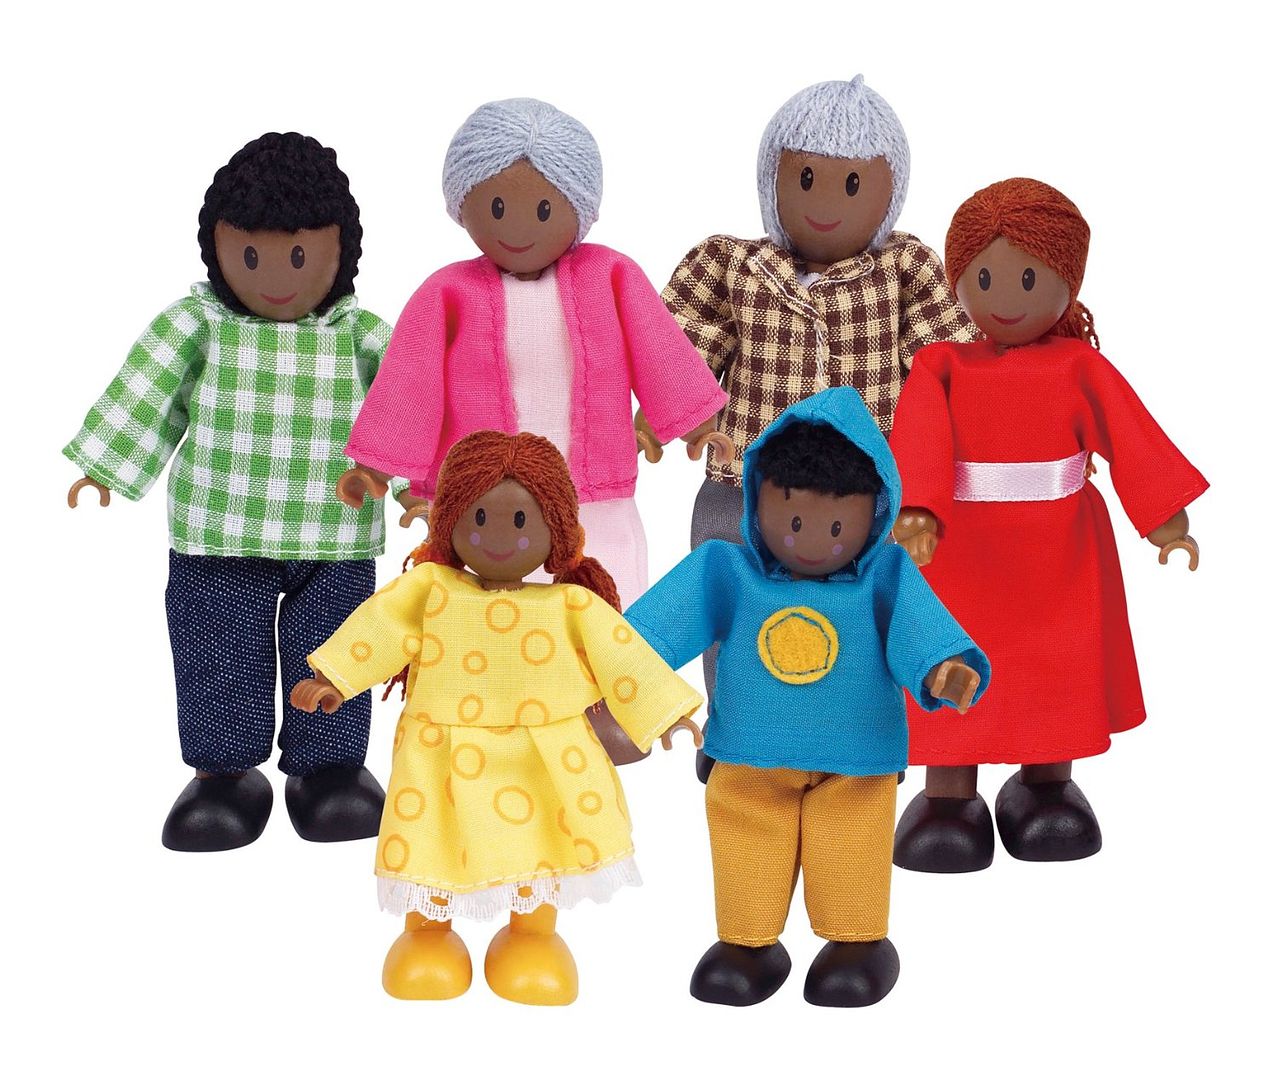 Hape offers diverse dollhouse families and they're so cute!